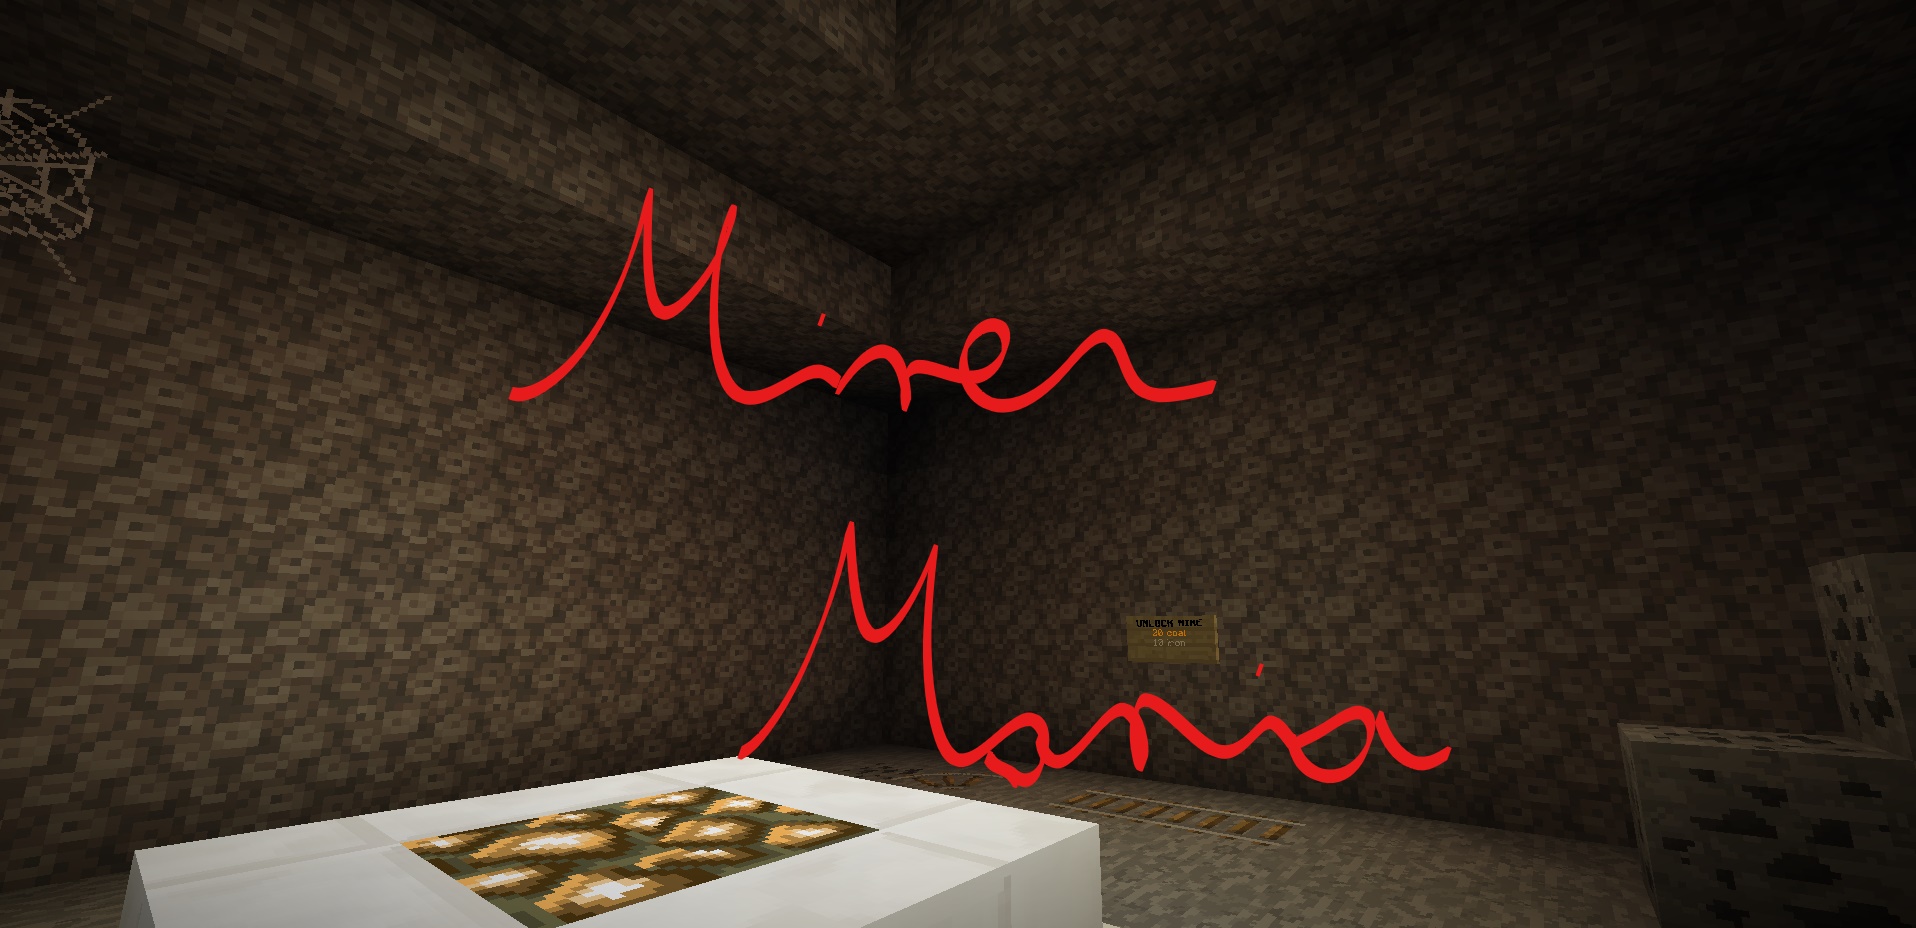 Download Miner Mania for Minecraft 1.15.2